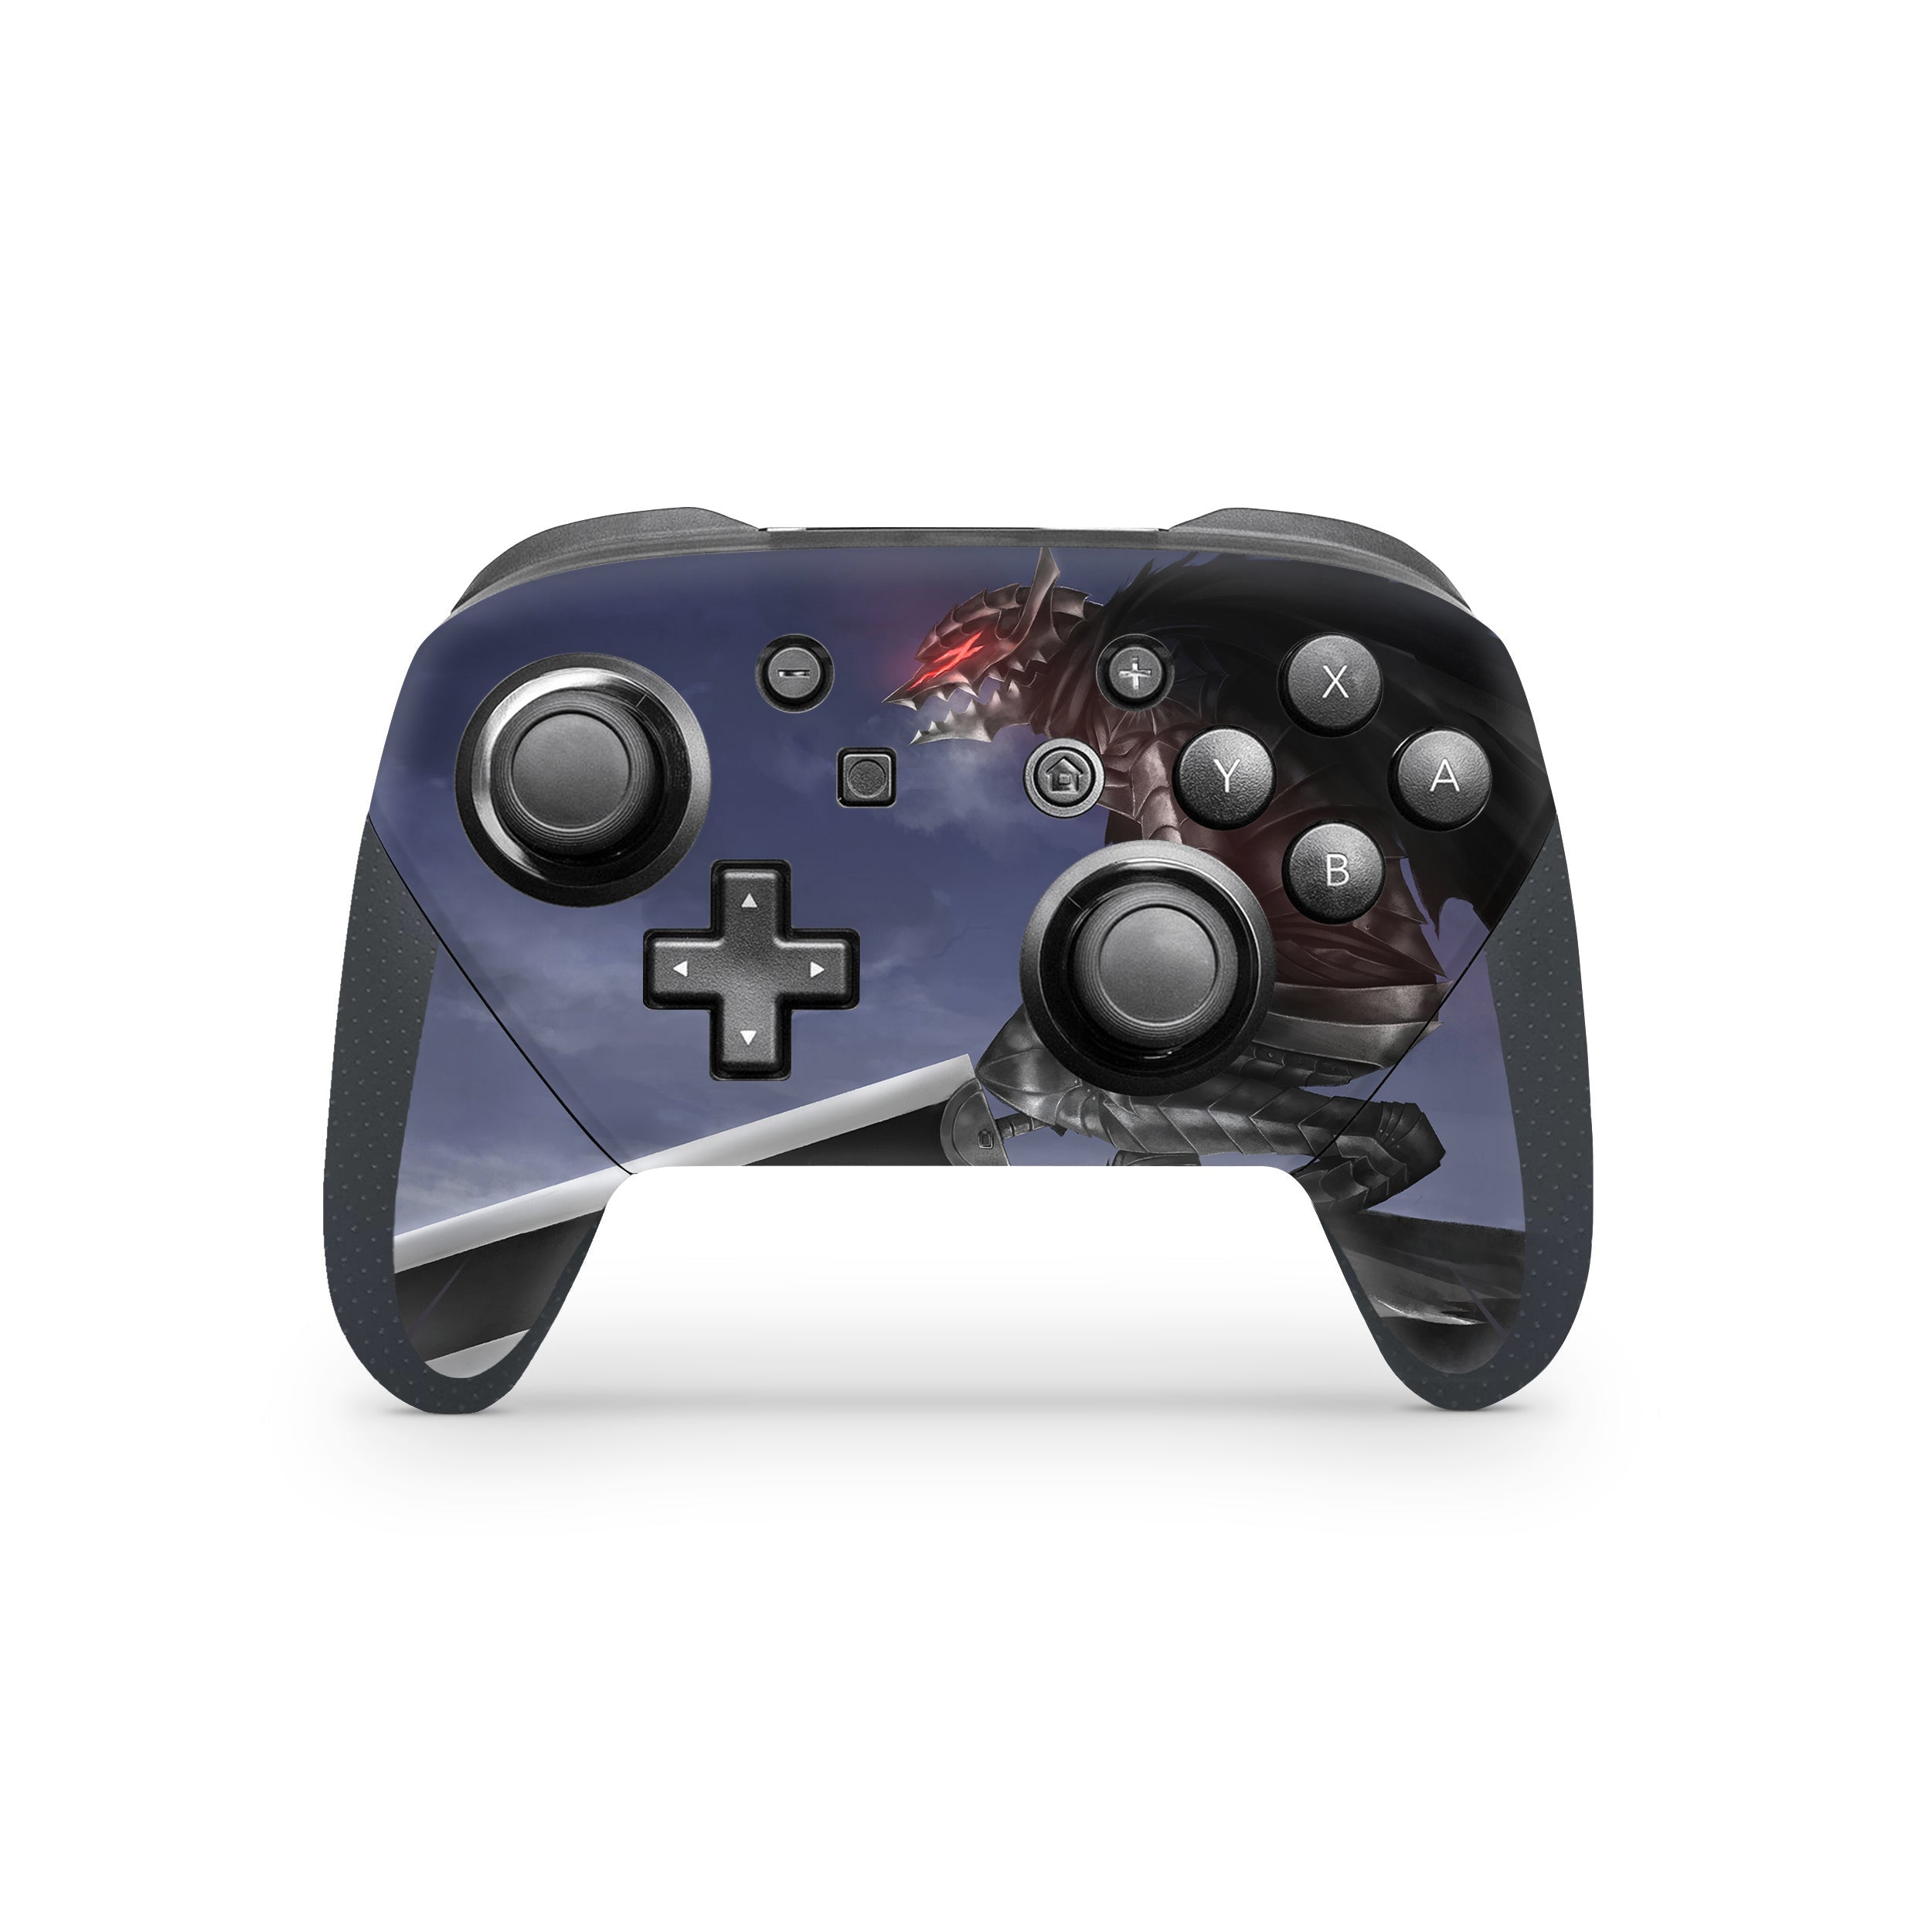 A video game skin featuring a Berserk Guts design for the Switch Pro Controller.